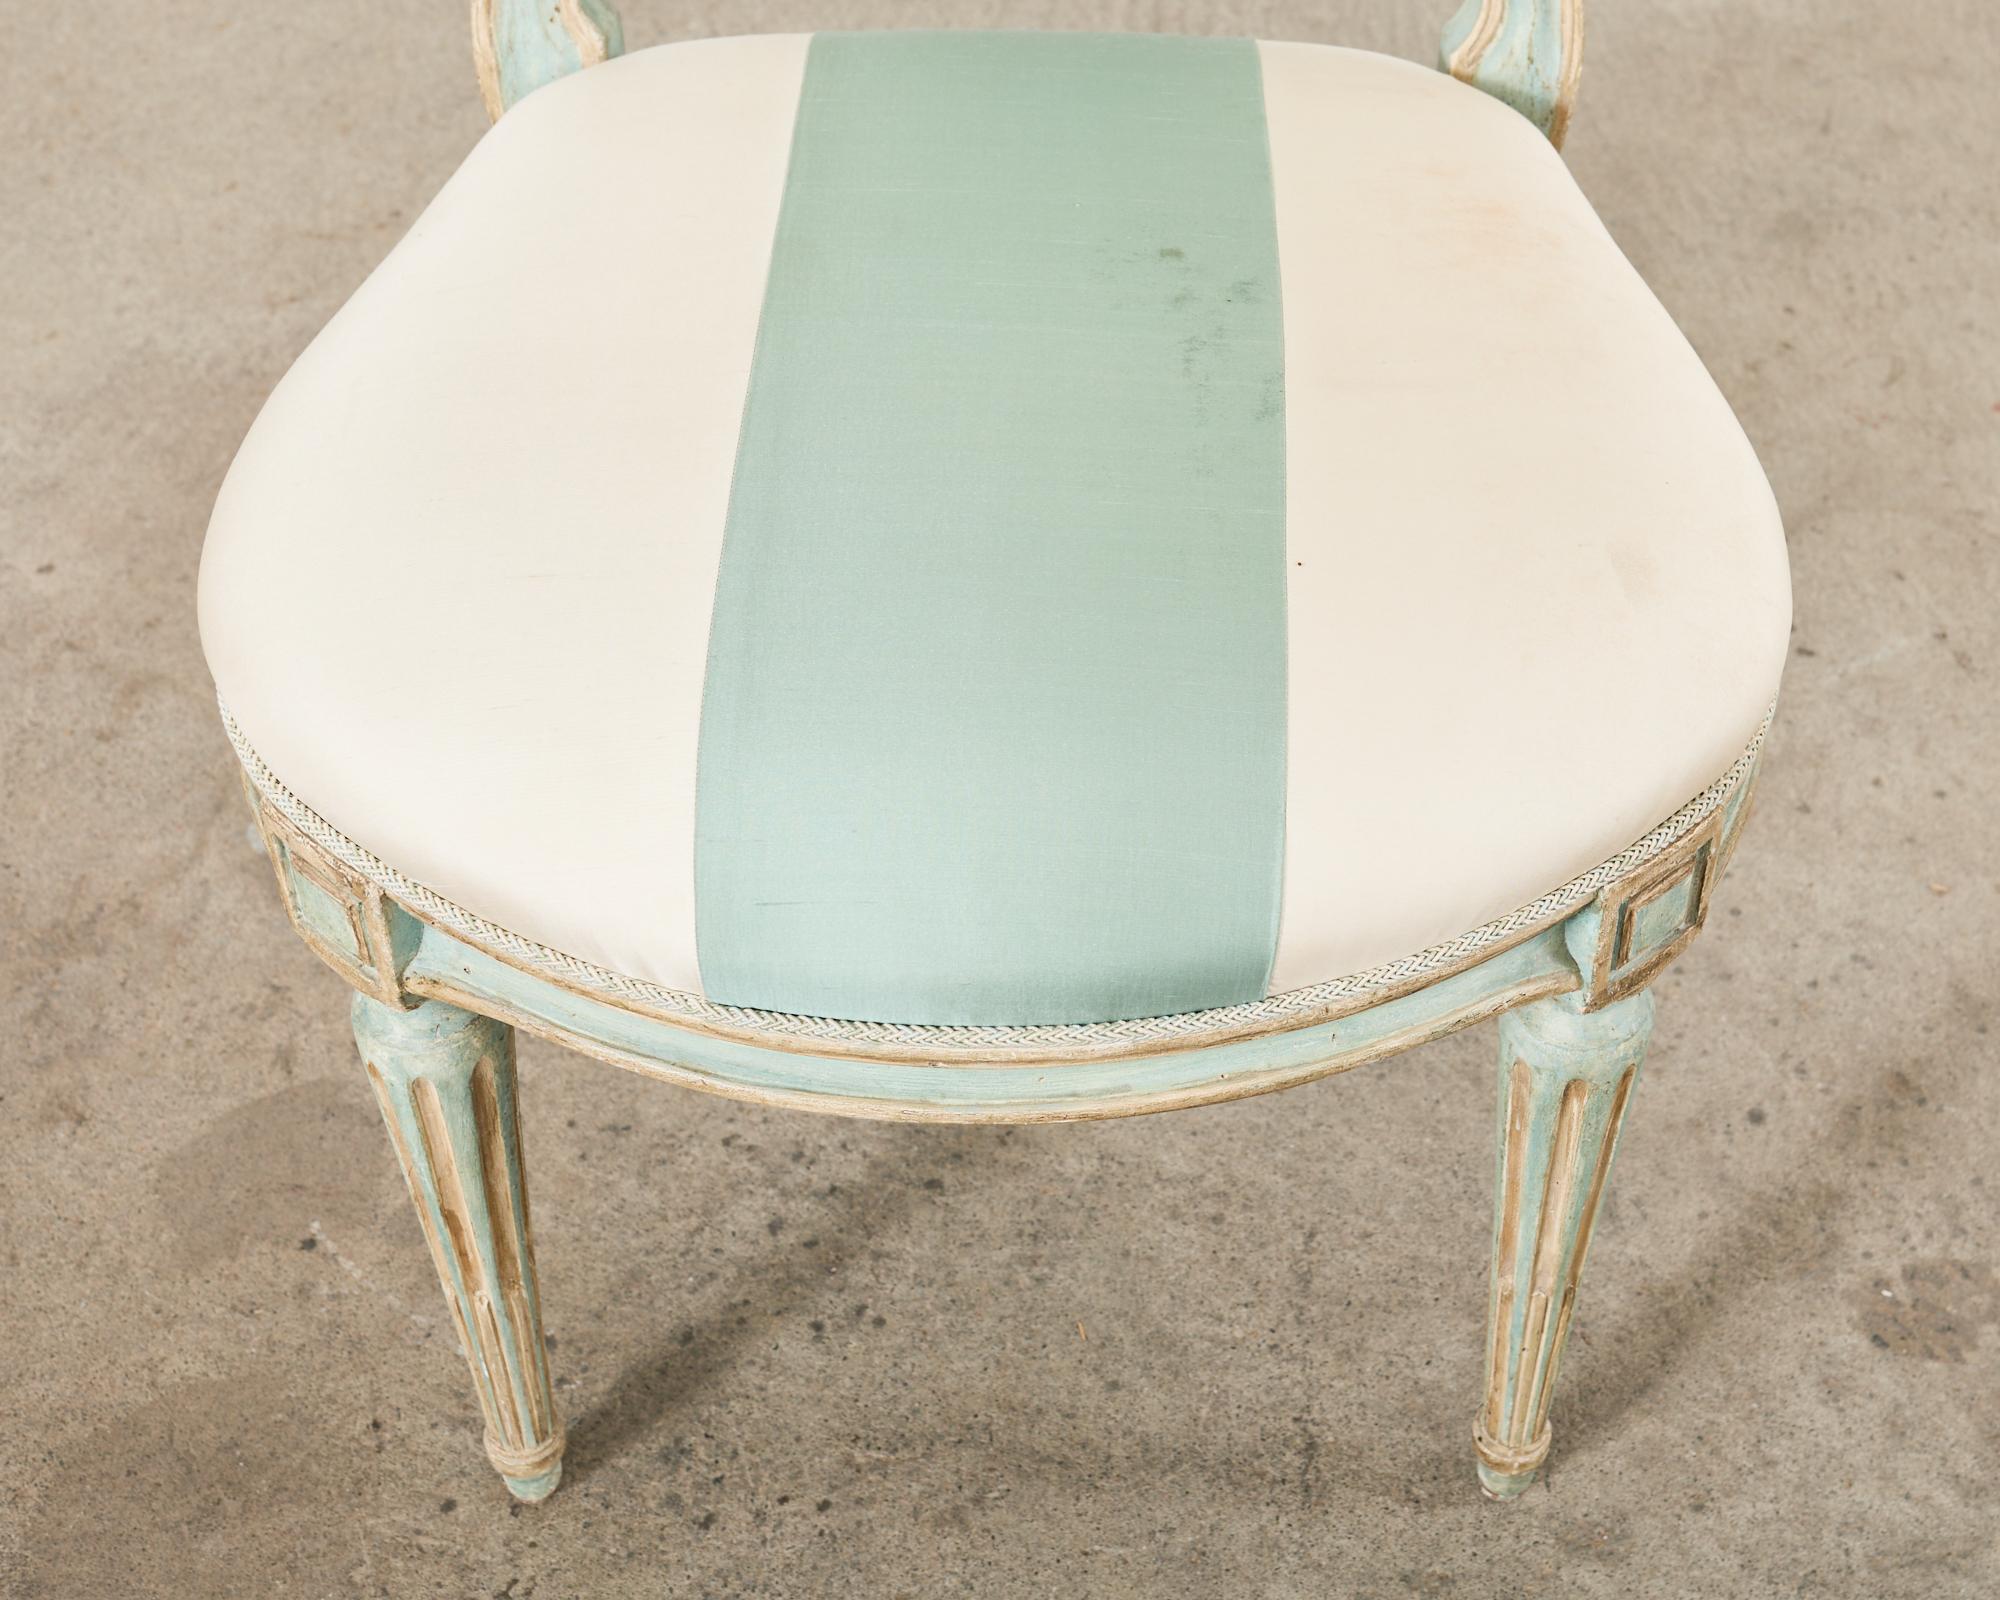 20th Century Dennis & Leen Louis XVI Style Painted Dining Chair For Sale